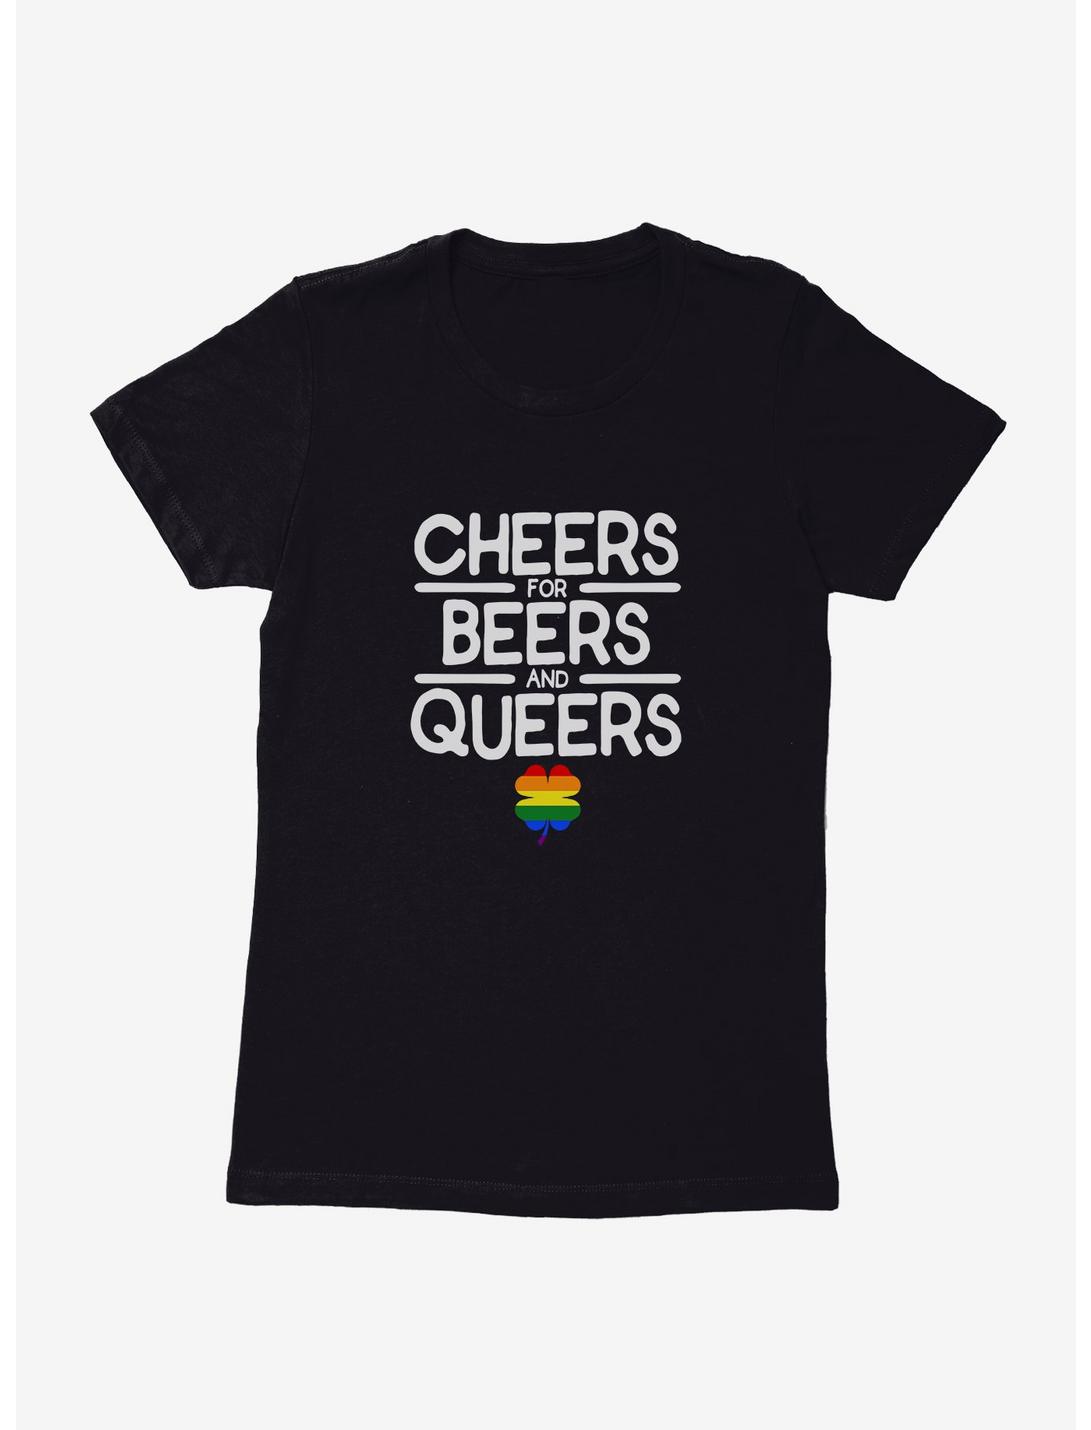 Cheers For Beers And Queers Womens T-Shirt, BLACK, hi-res